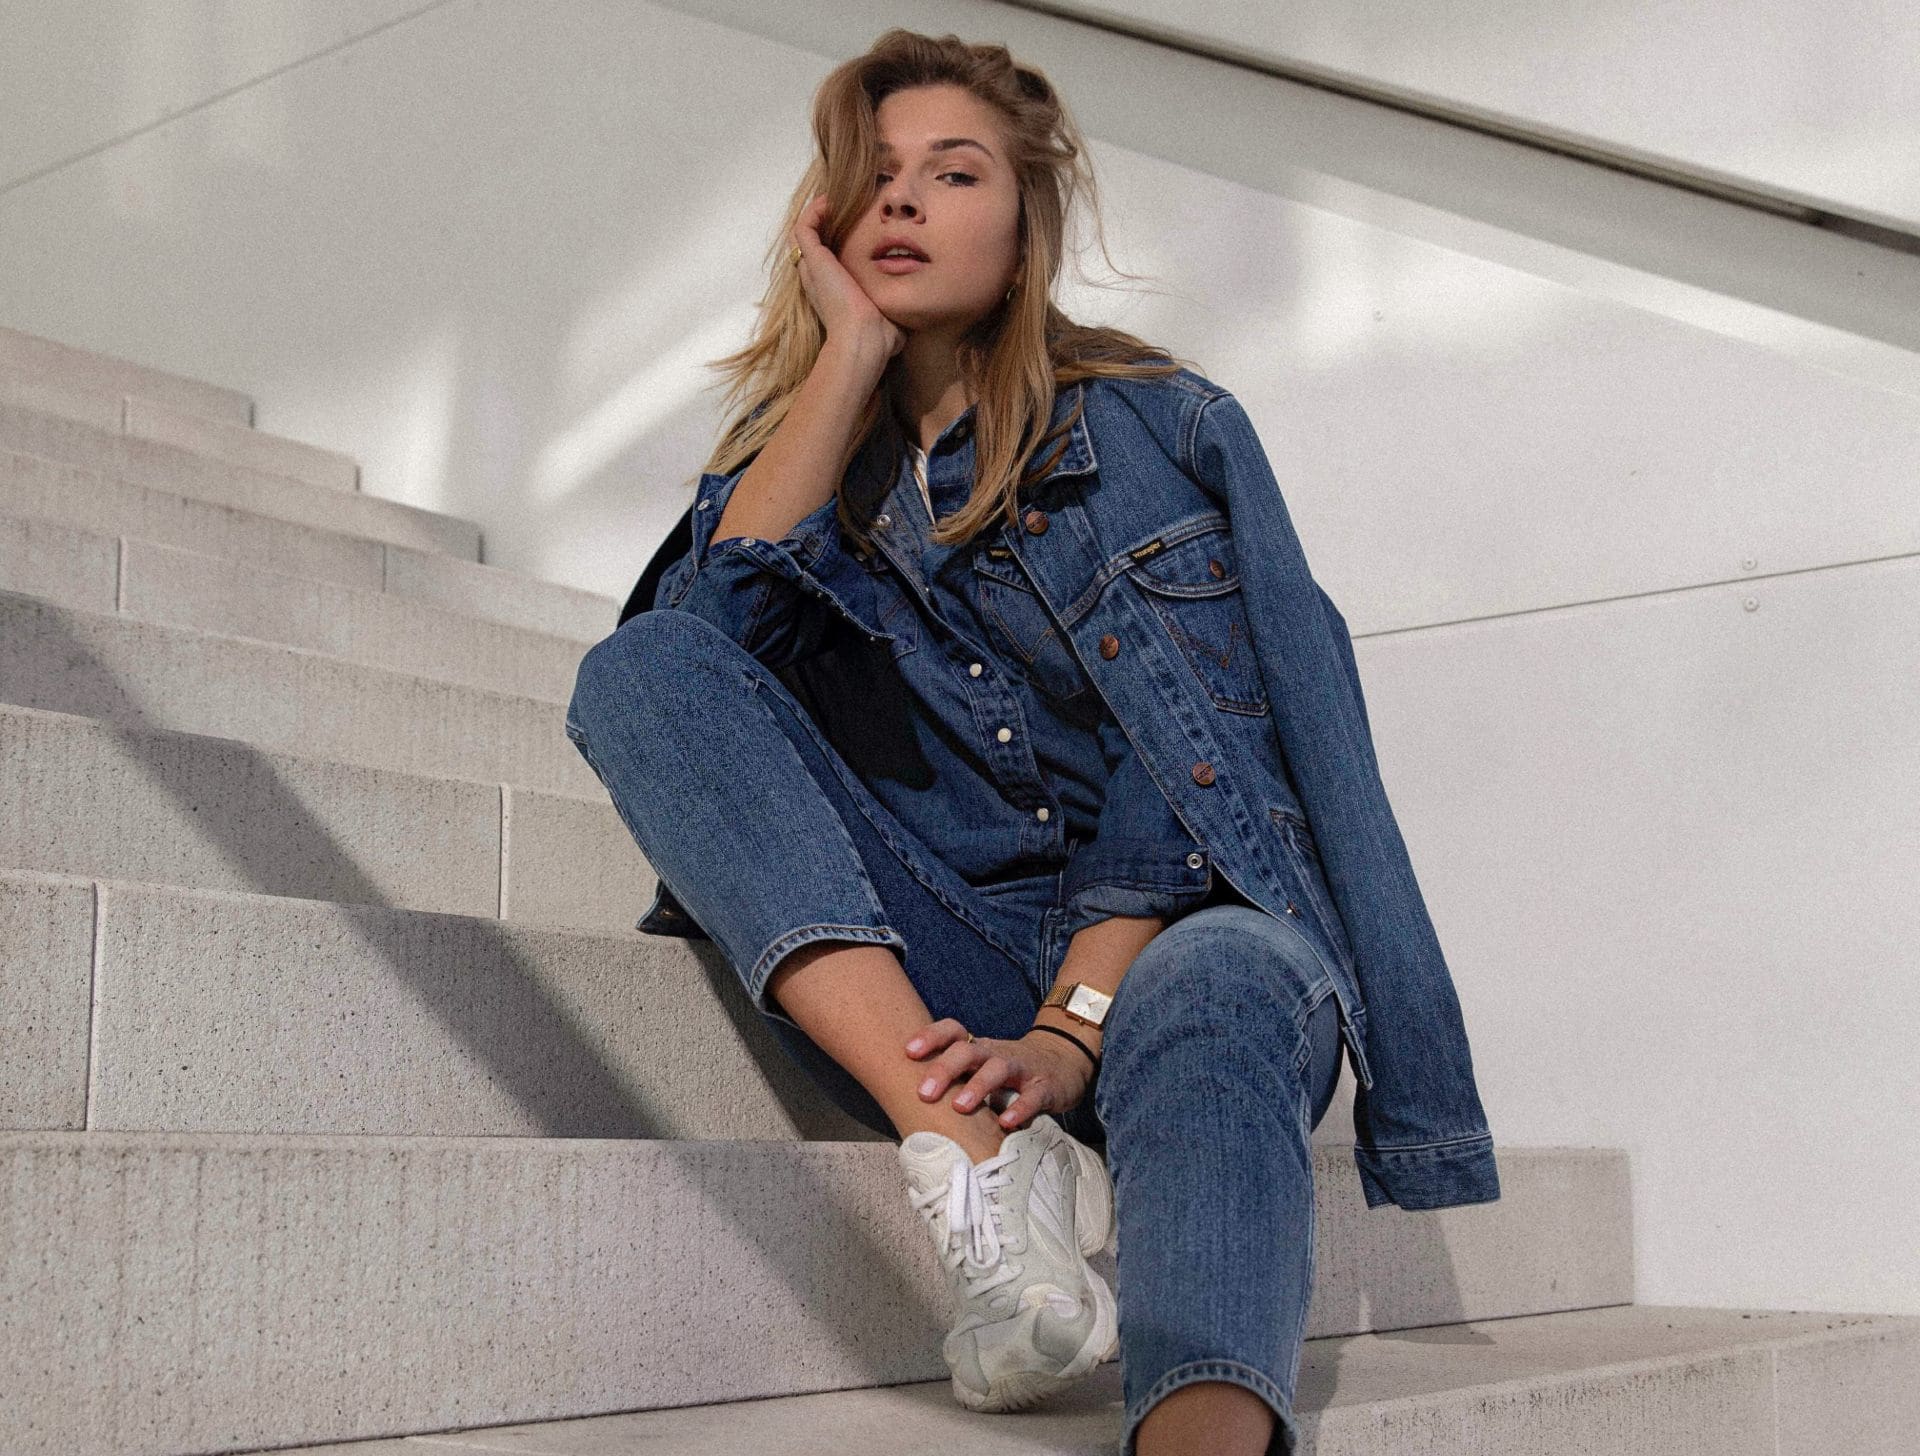 woman in full denim outfit sitting on steps